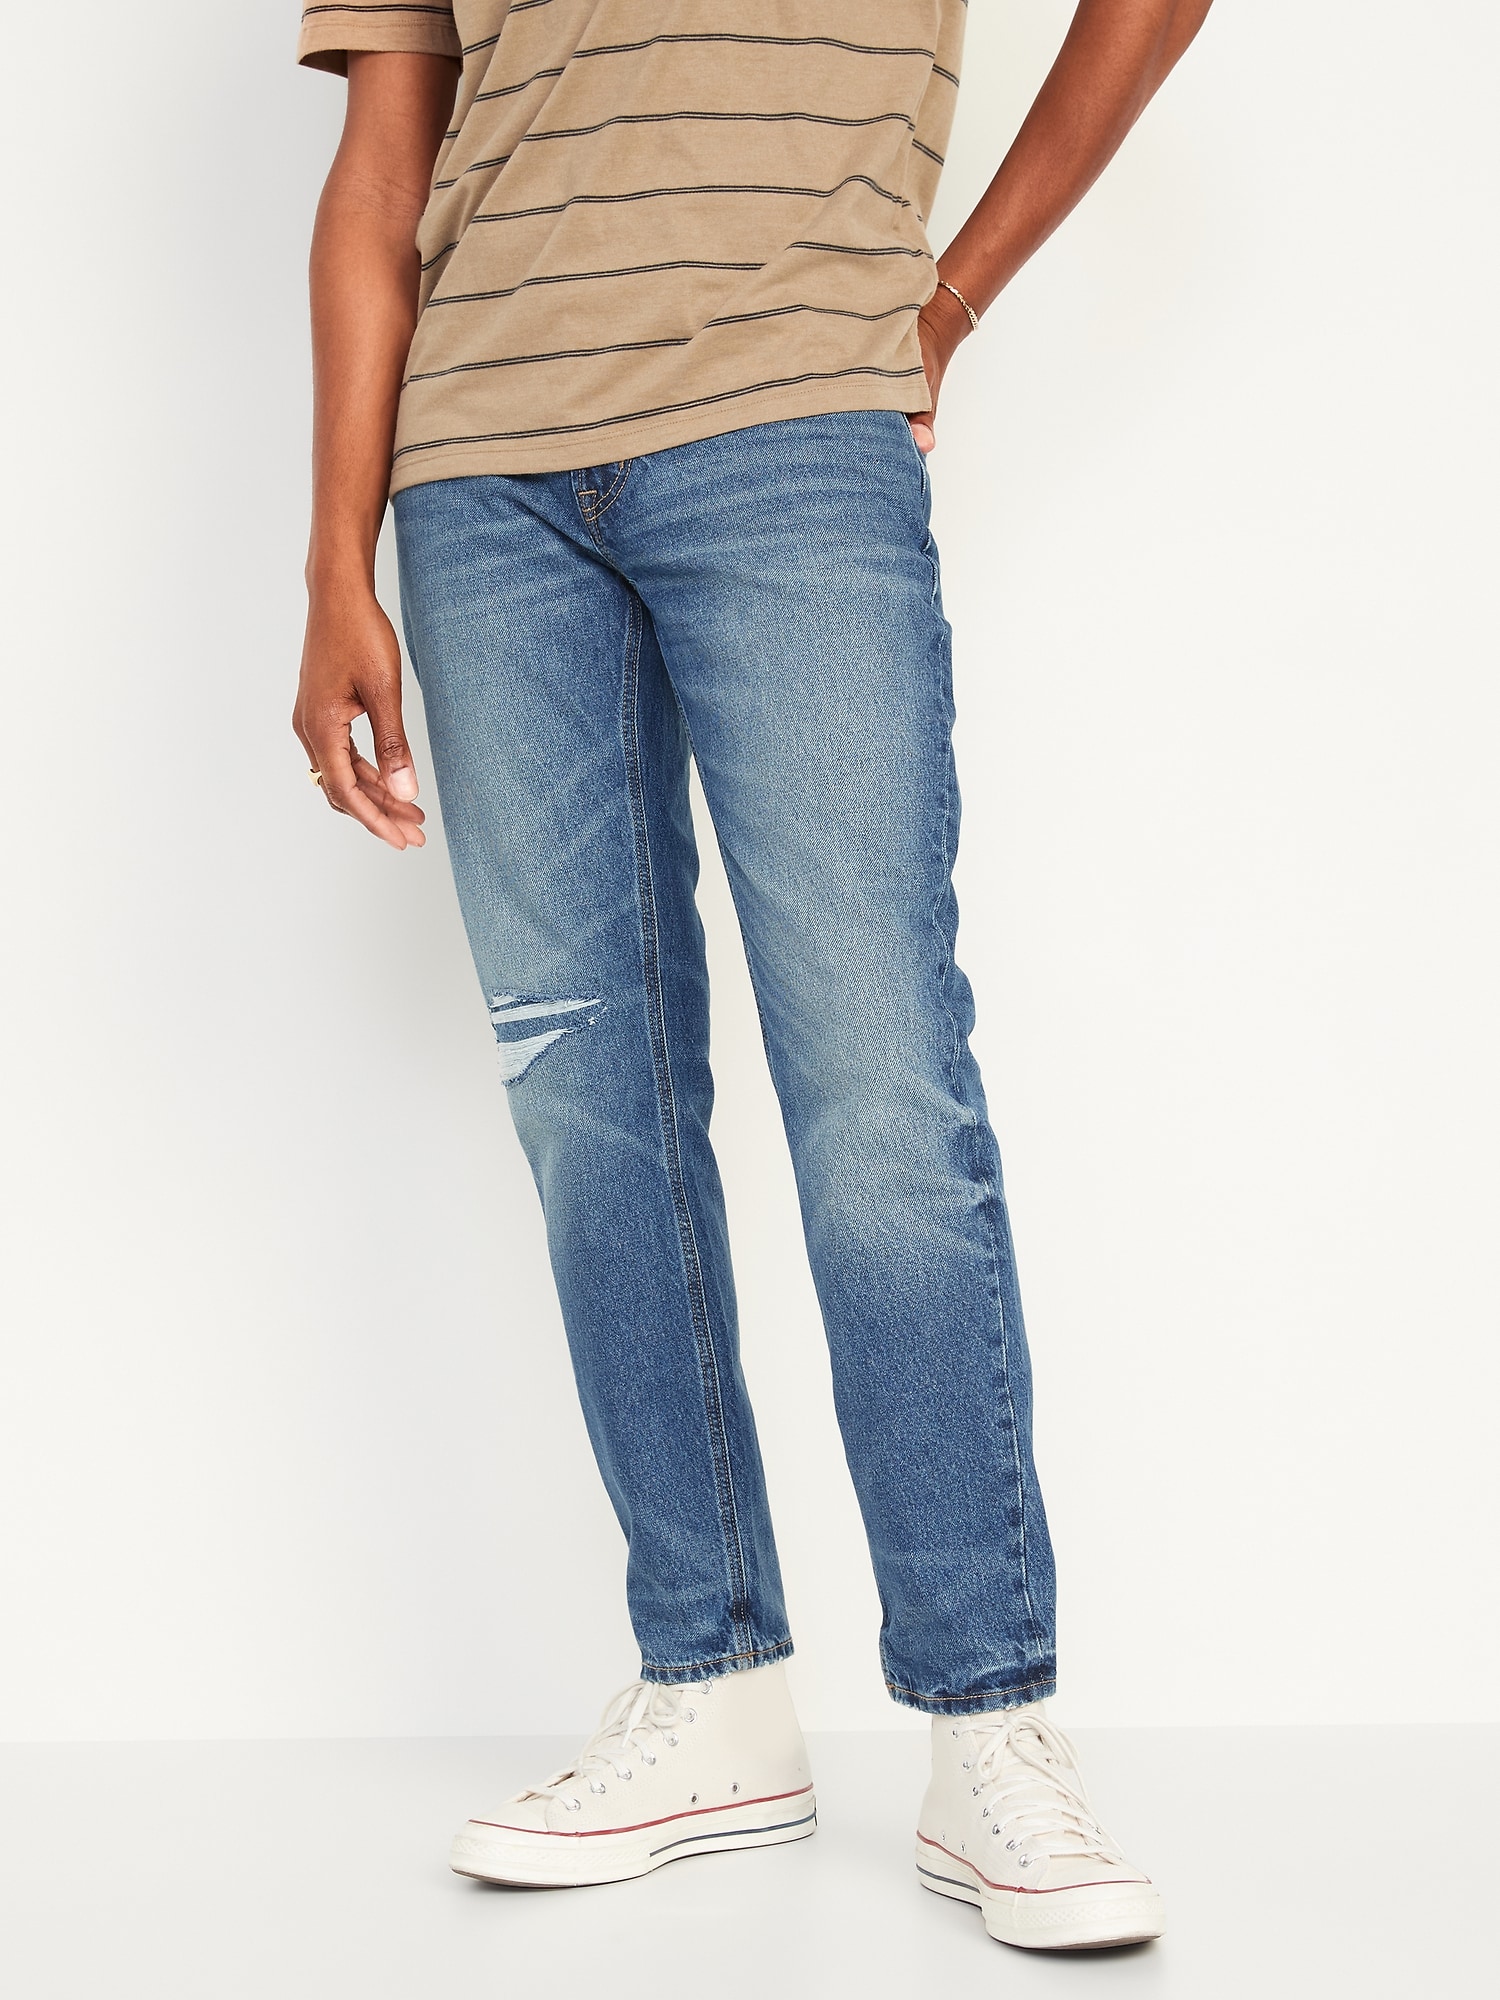 Original Straight Taper Non-Stretch Jeans for Men | Old Navy